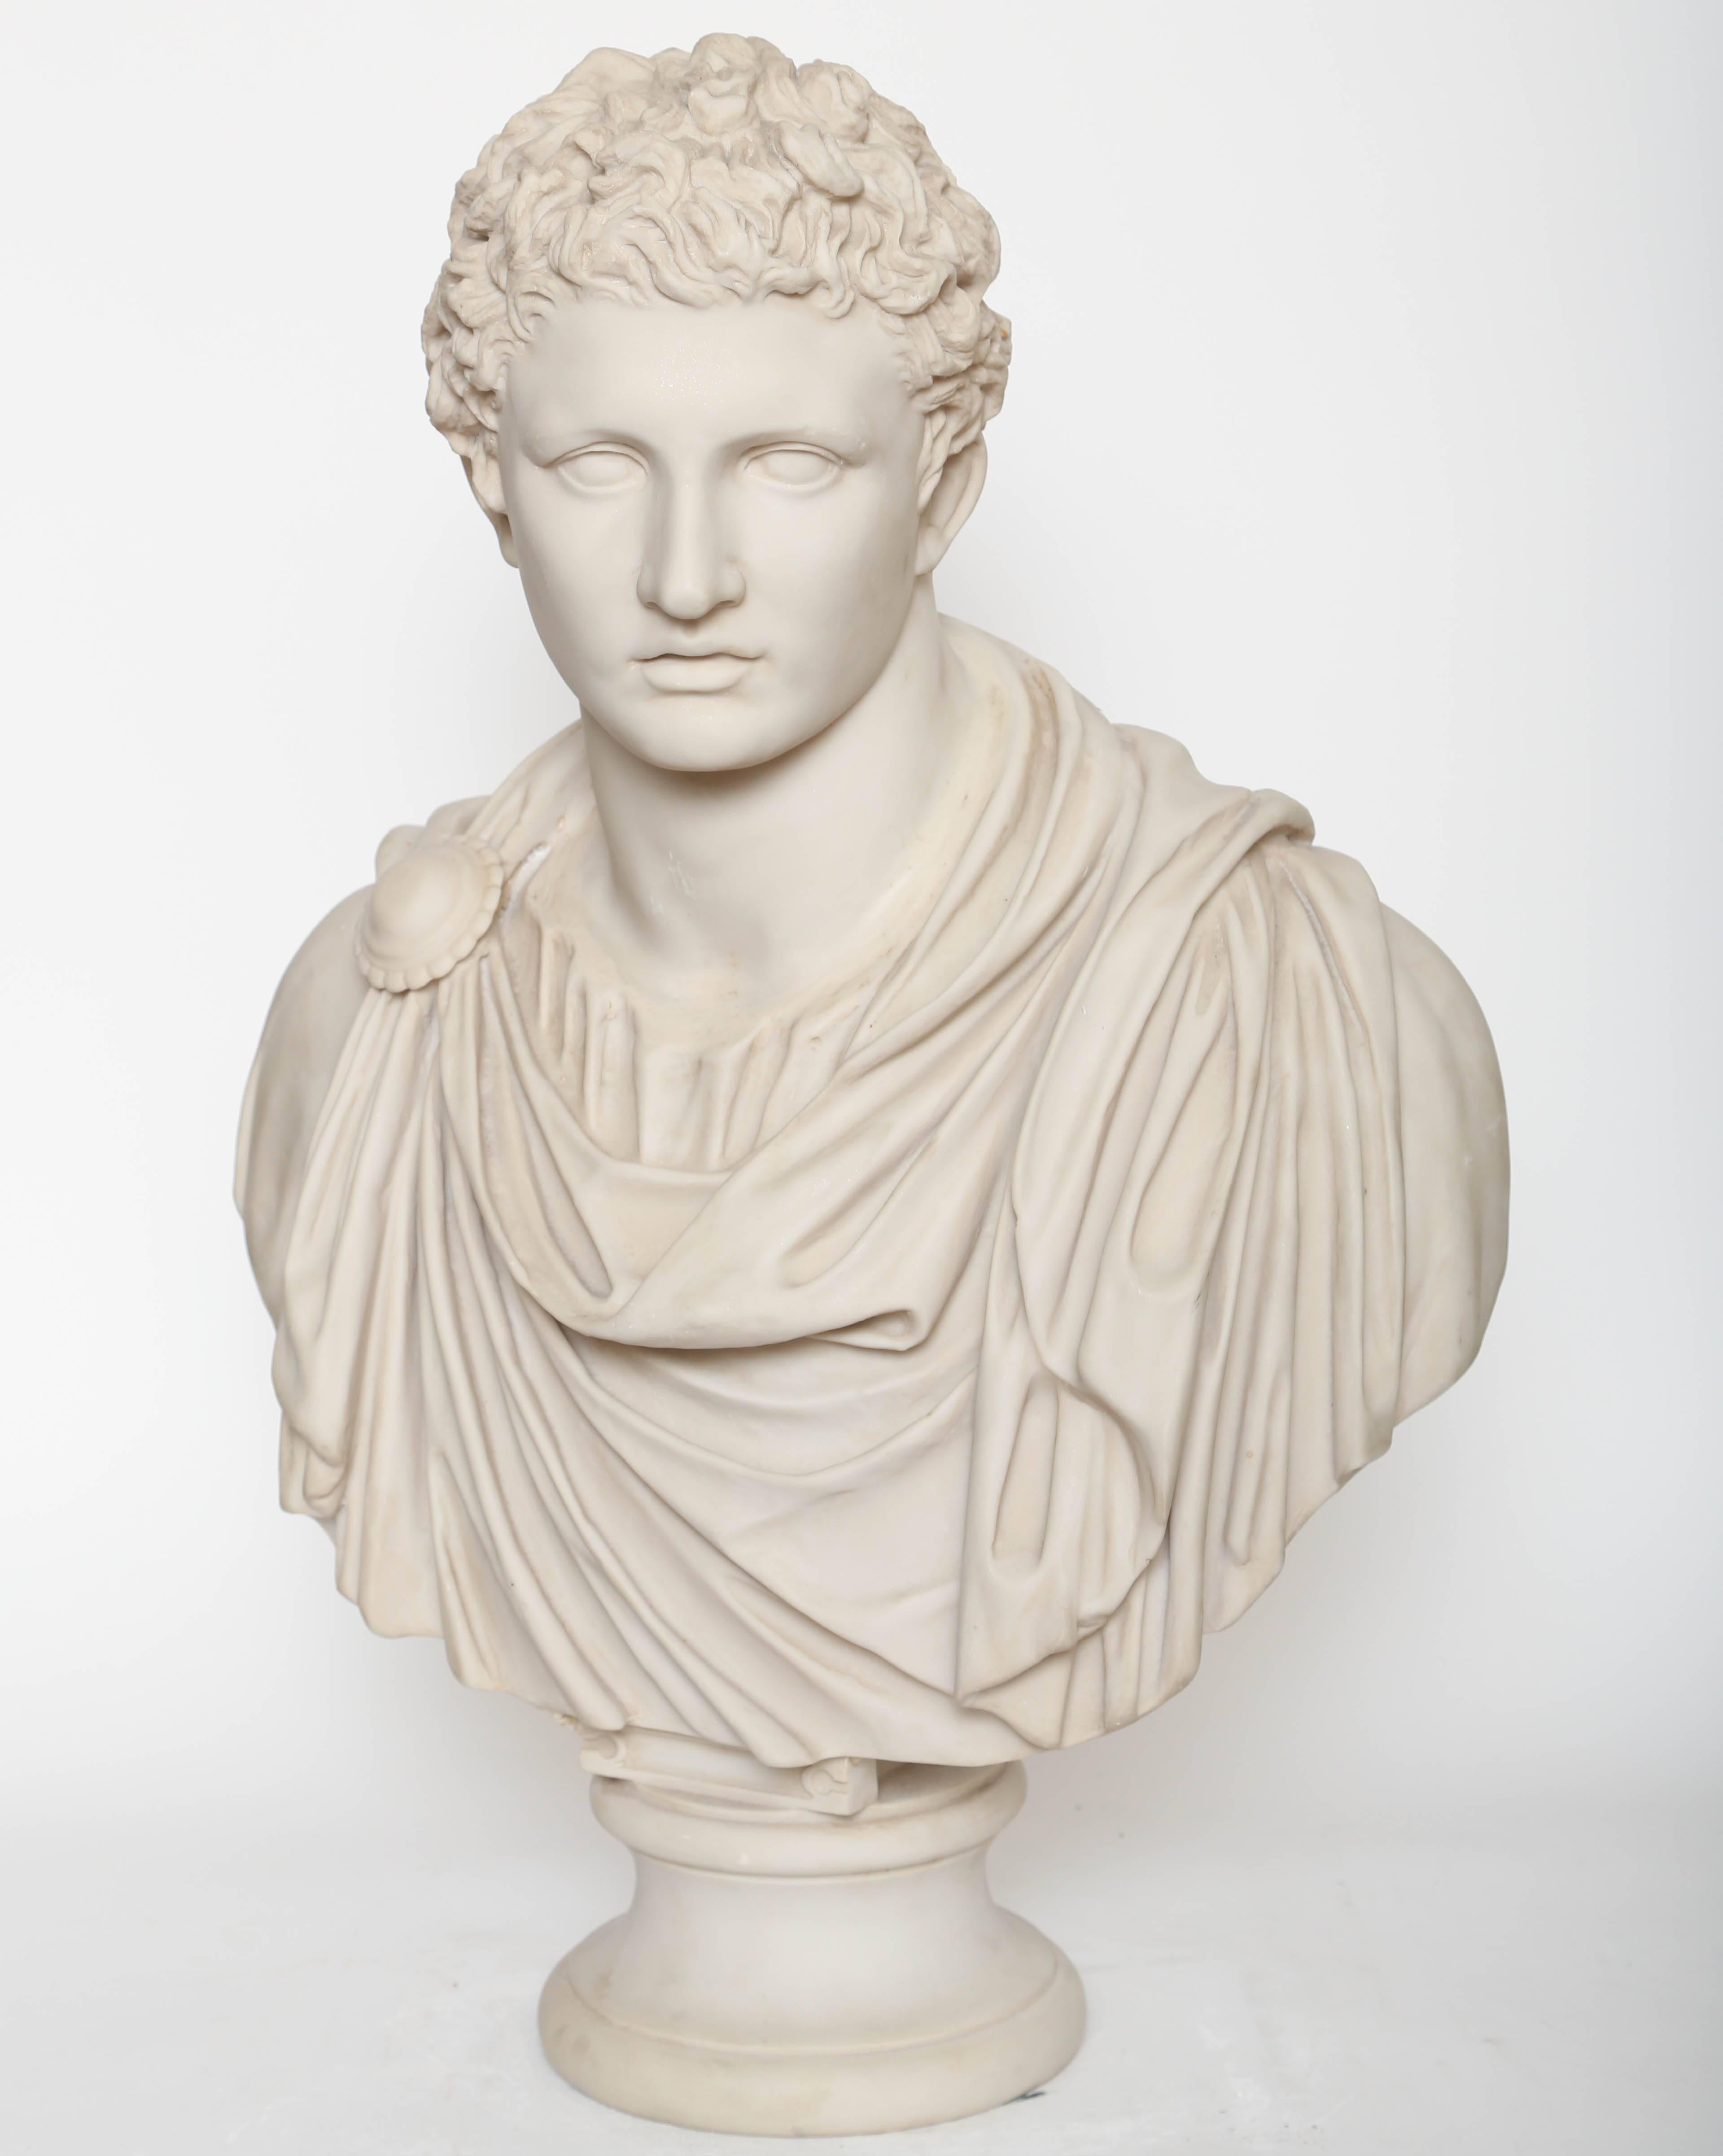 Well-figured decorative composition/resin bust of Roman Emperor.